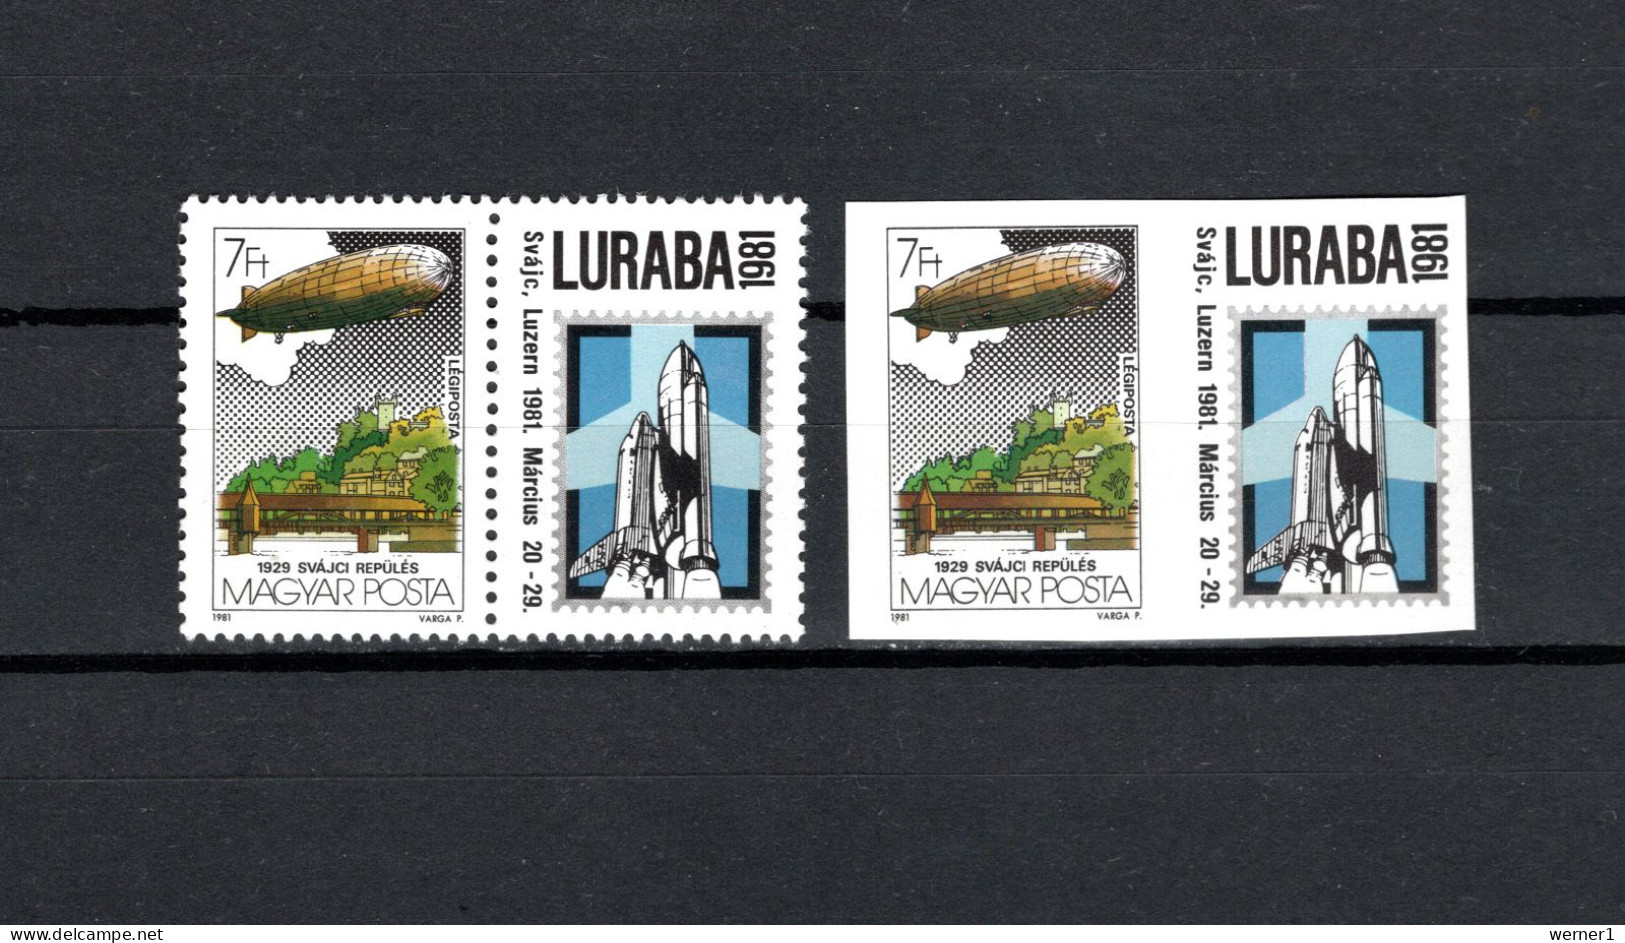 Hungary 1981 Space, Zeppelin 7Ft Stamp Perf. And Imperf. With Luraba Label MNH - Europe